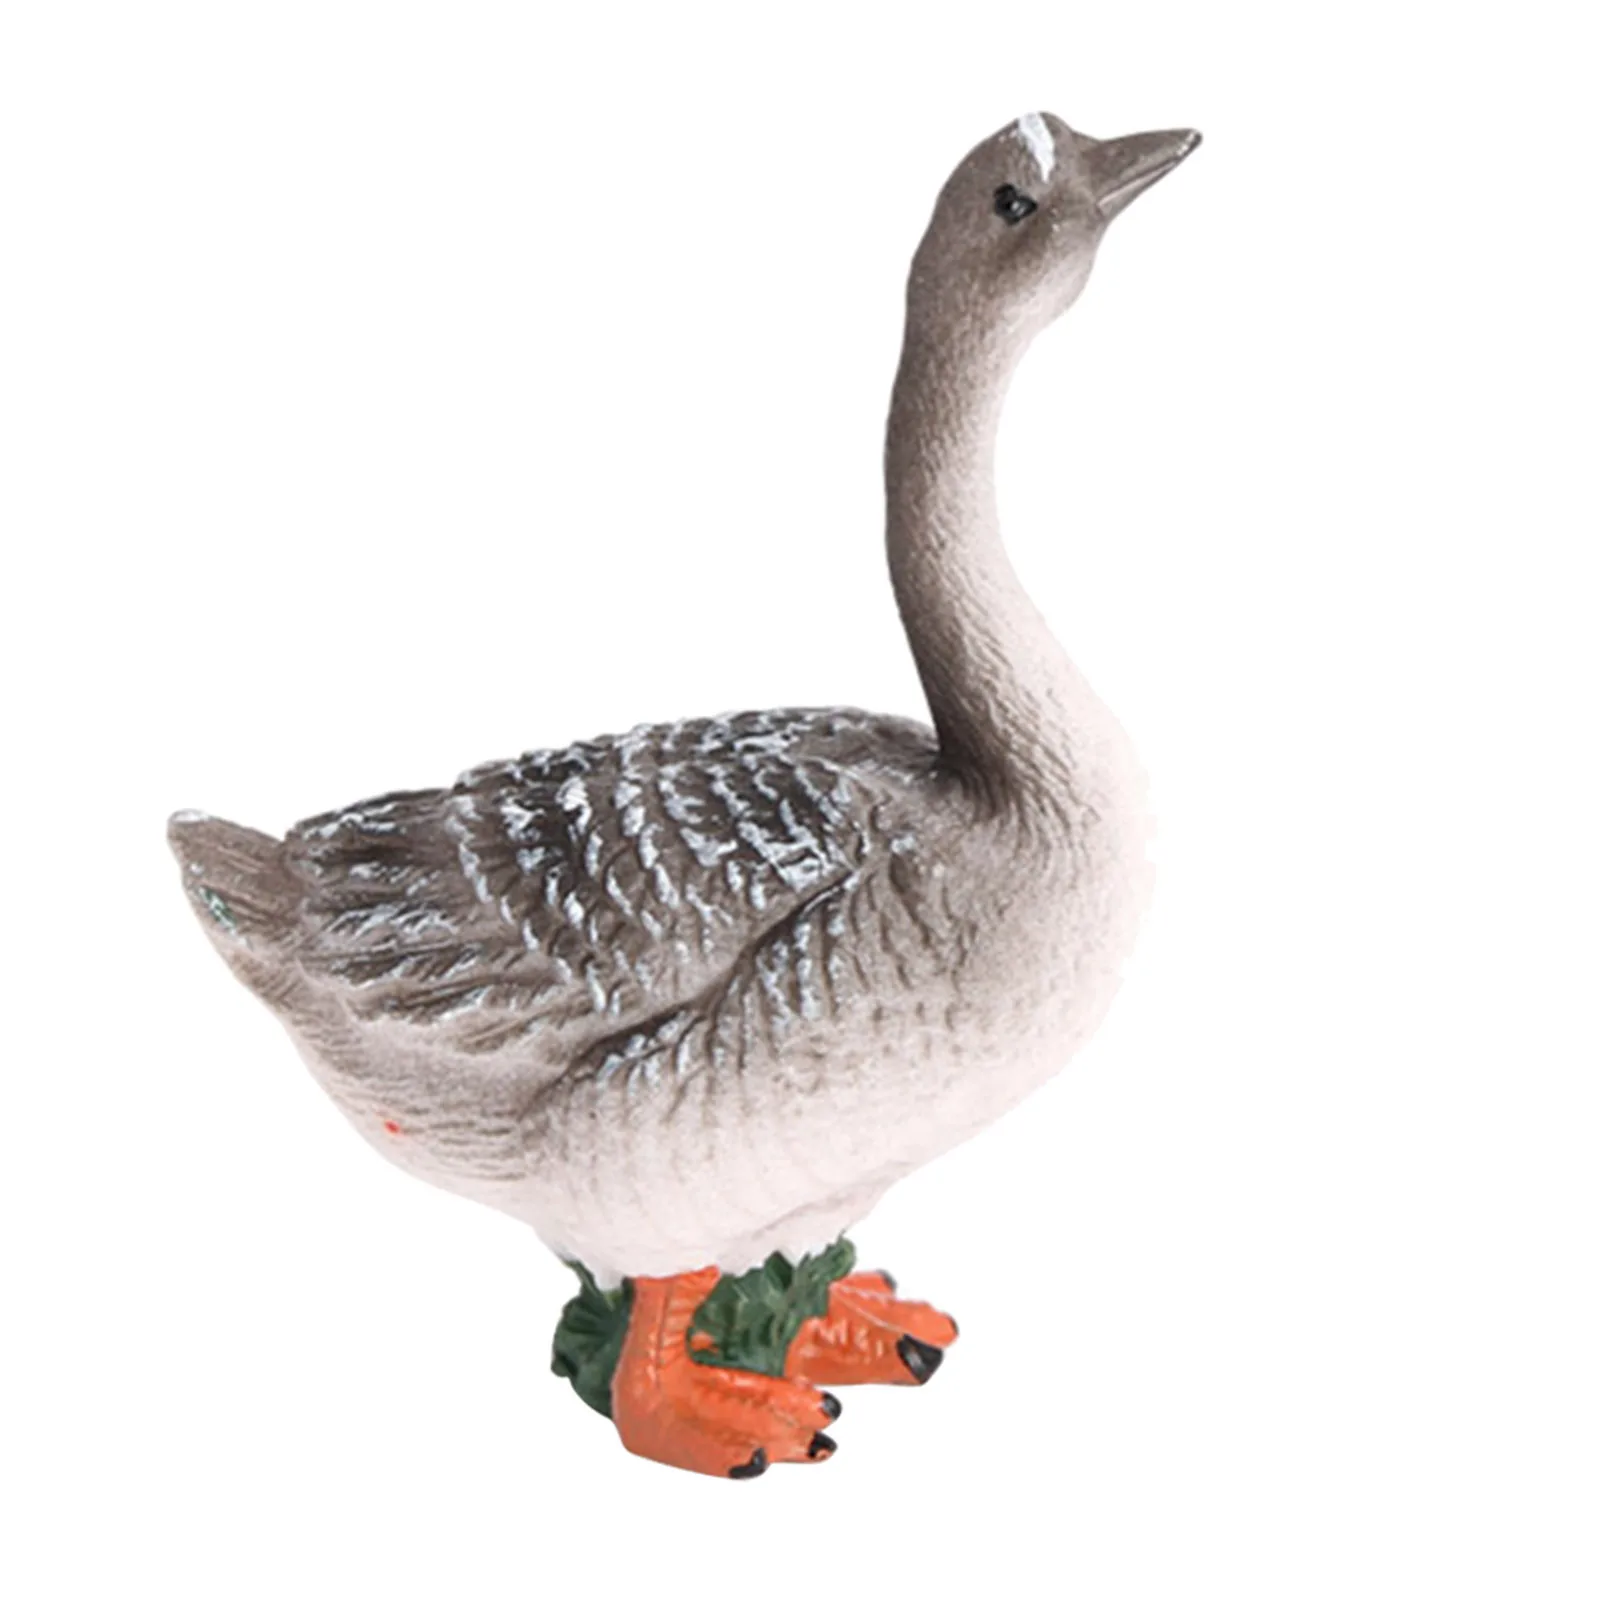 Realistic Growth Cycle Plastic Life Cycle Goose Model Biology Toy Teaching Aids